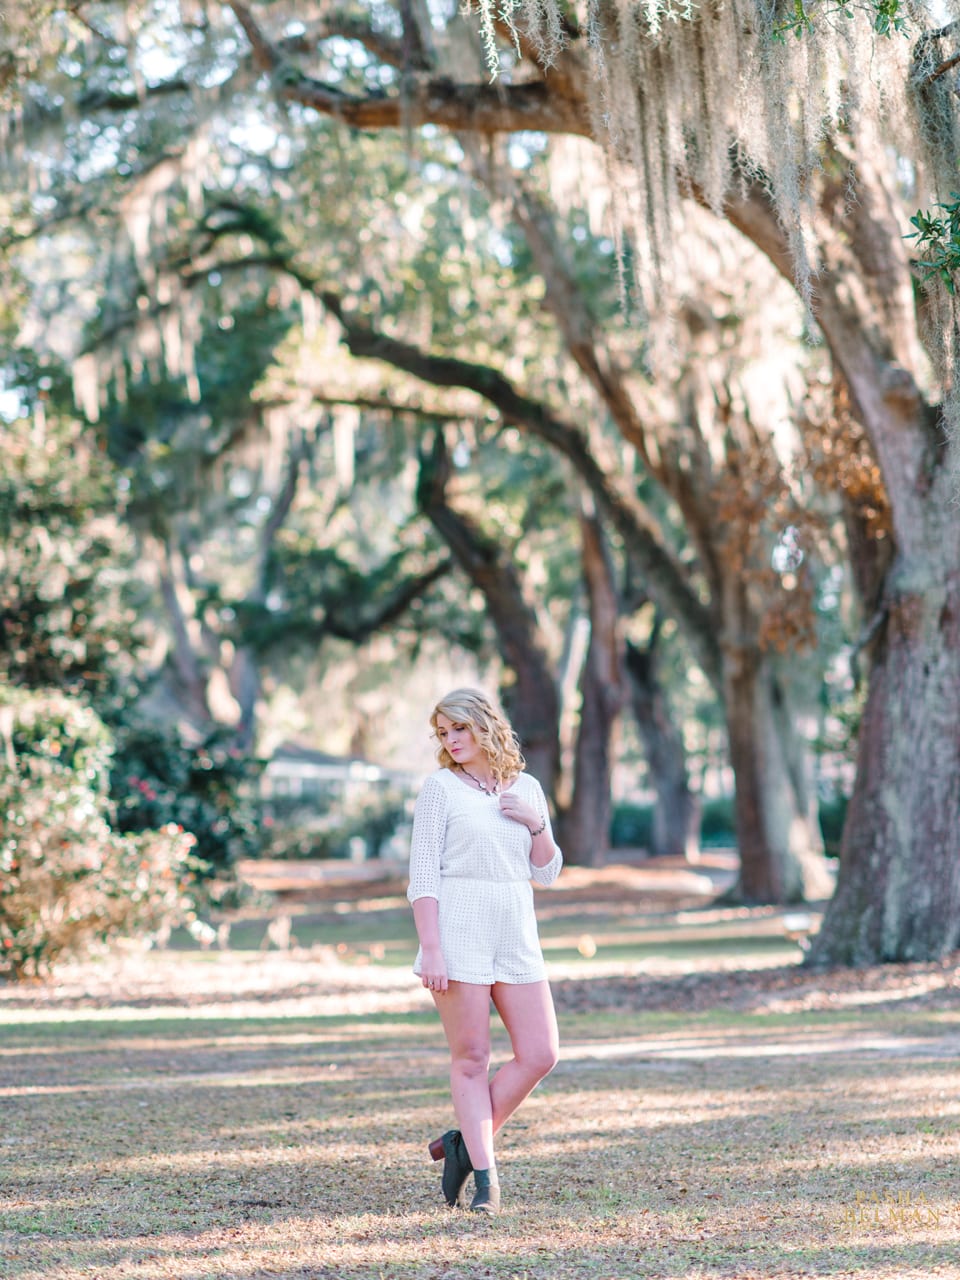 Live Oak Tree Plantation Senior Pictures at Wachesaw in Murrells Inlet by Pasha Belman Photography